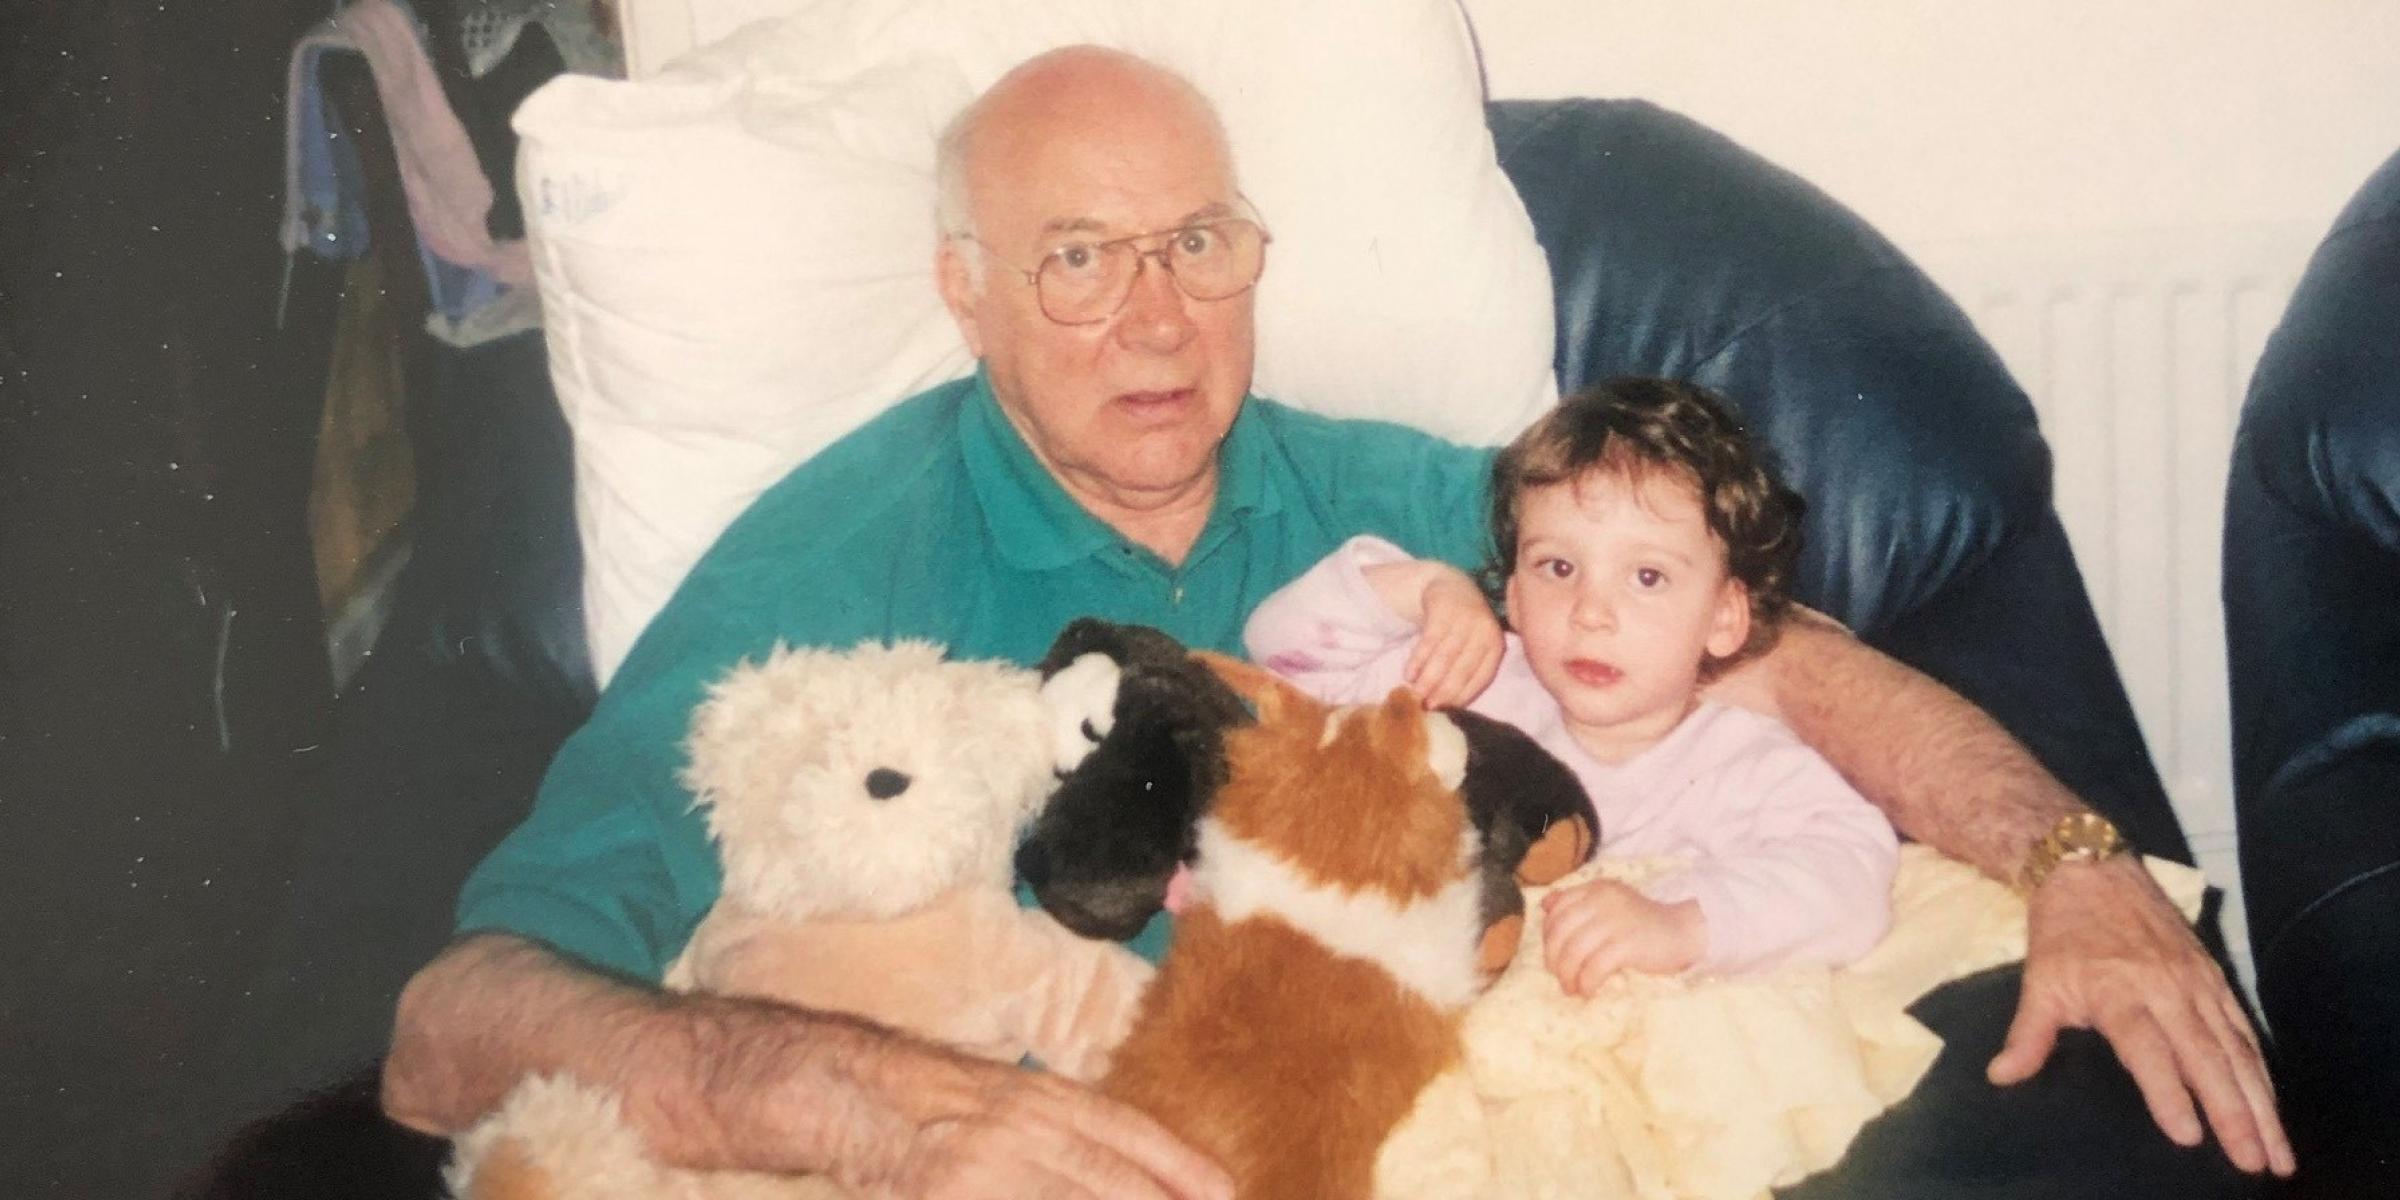 Olivia Fairhurst as a child sitting in the lap of her grandfather, Robert